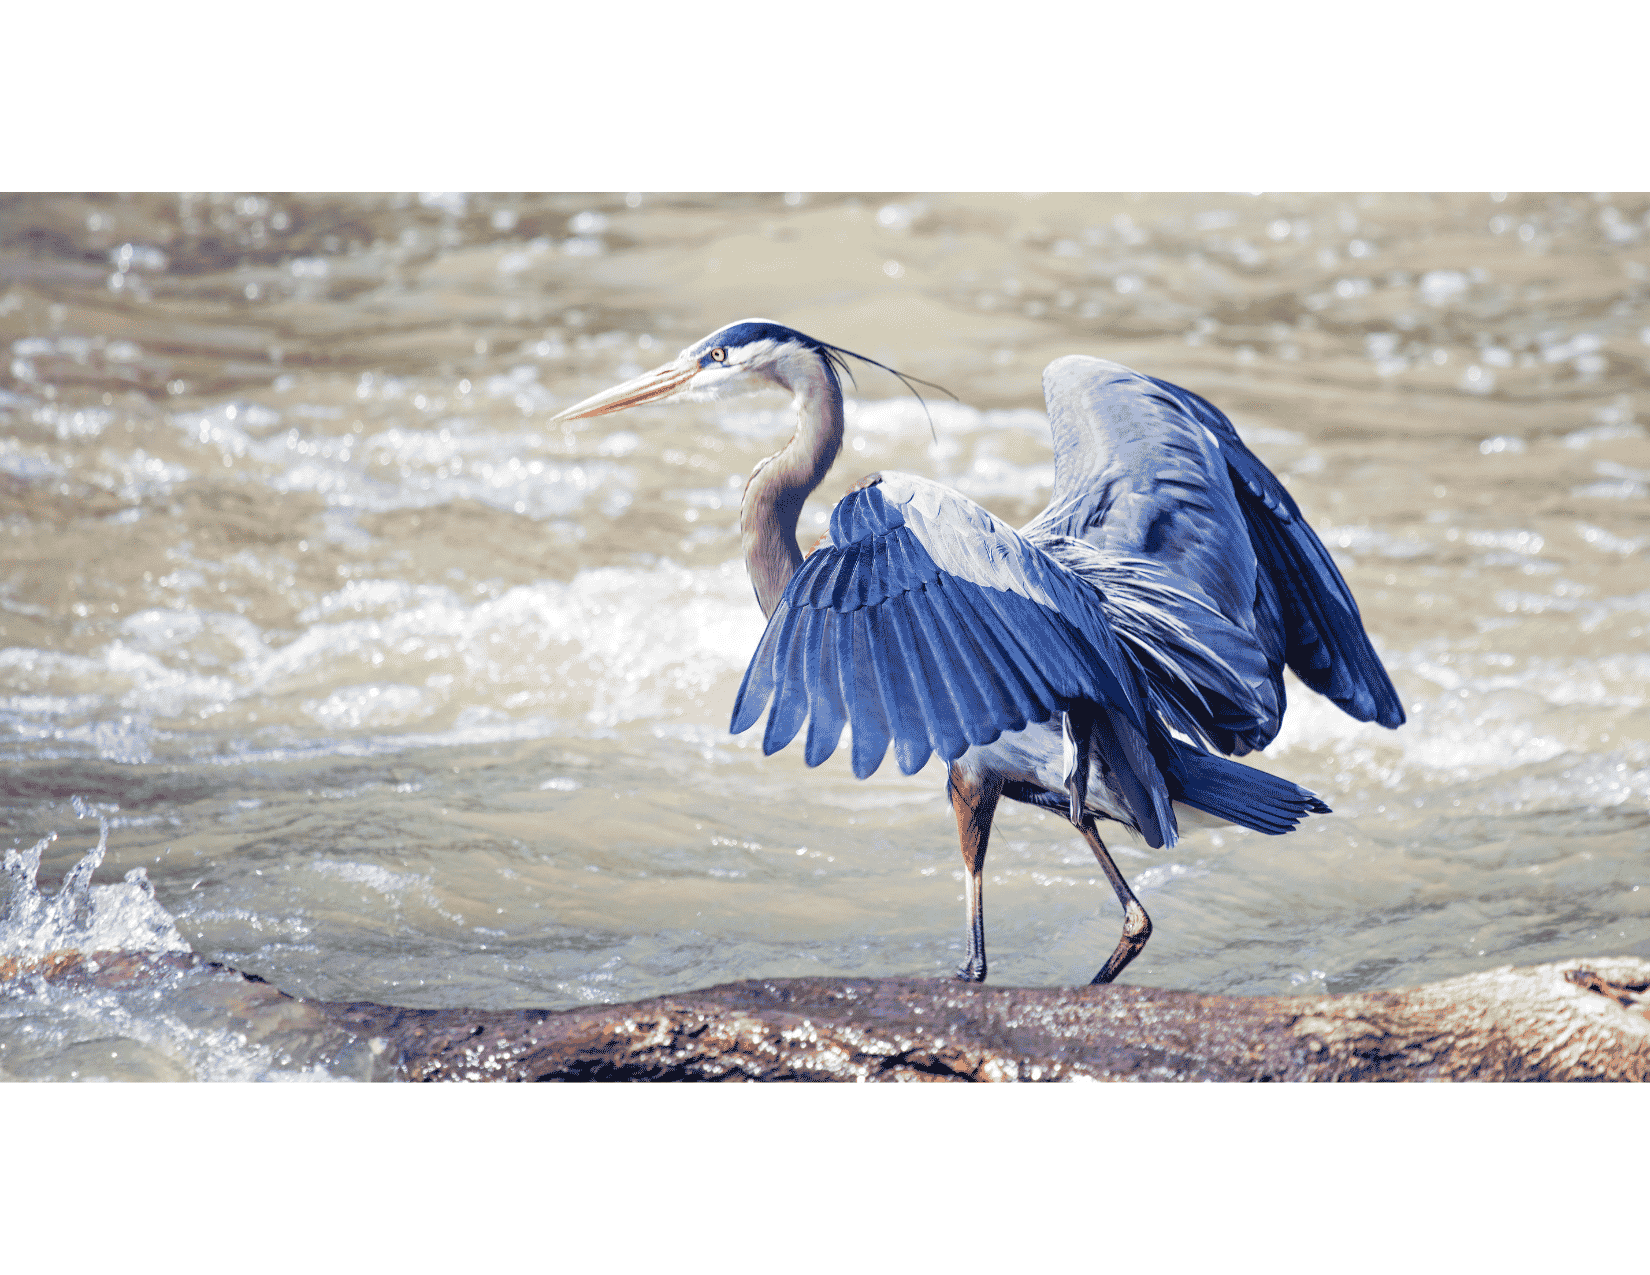 Heron by the Falls